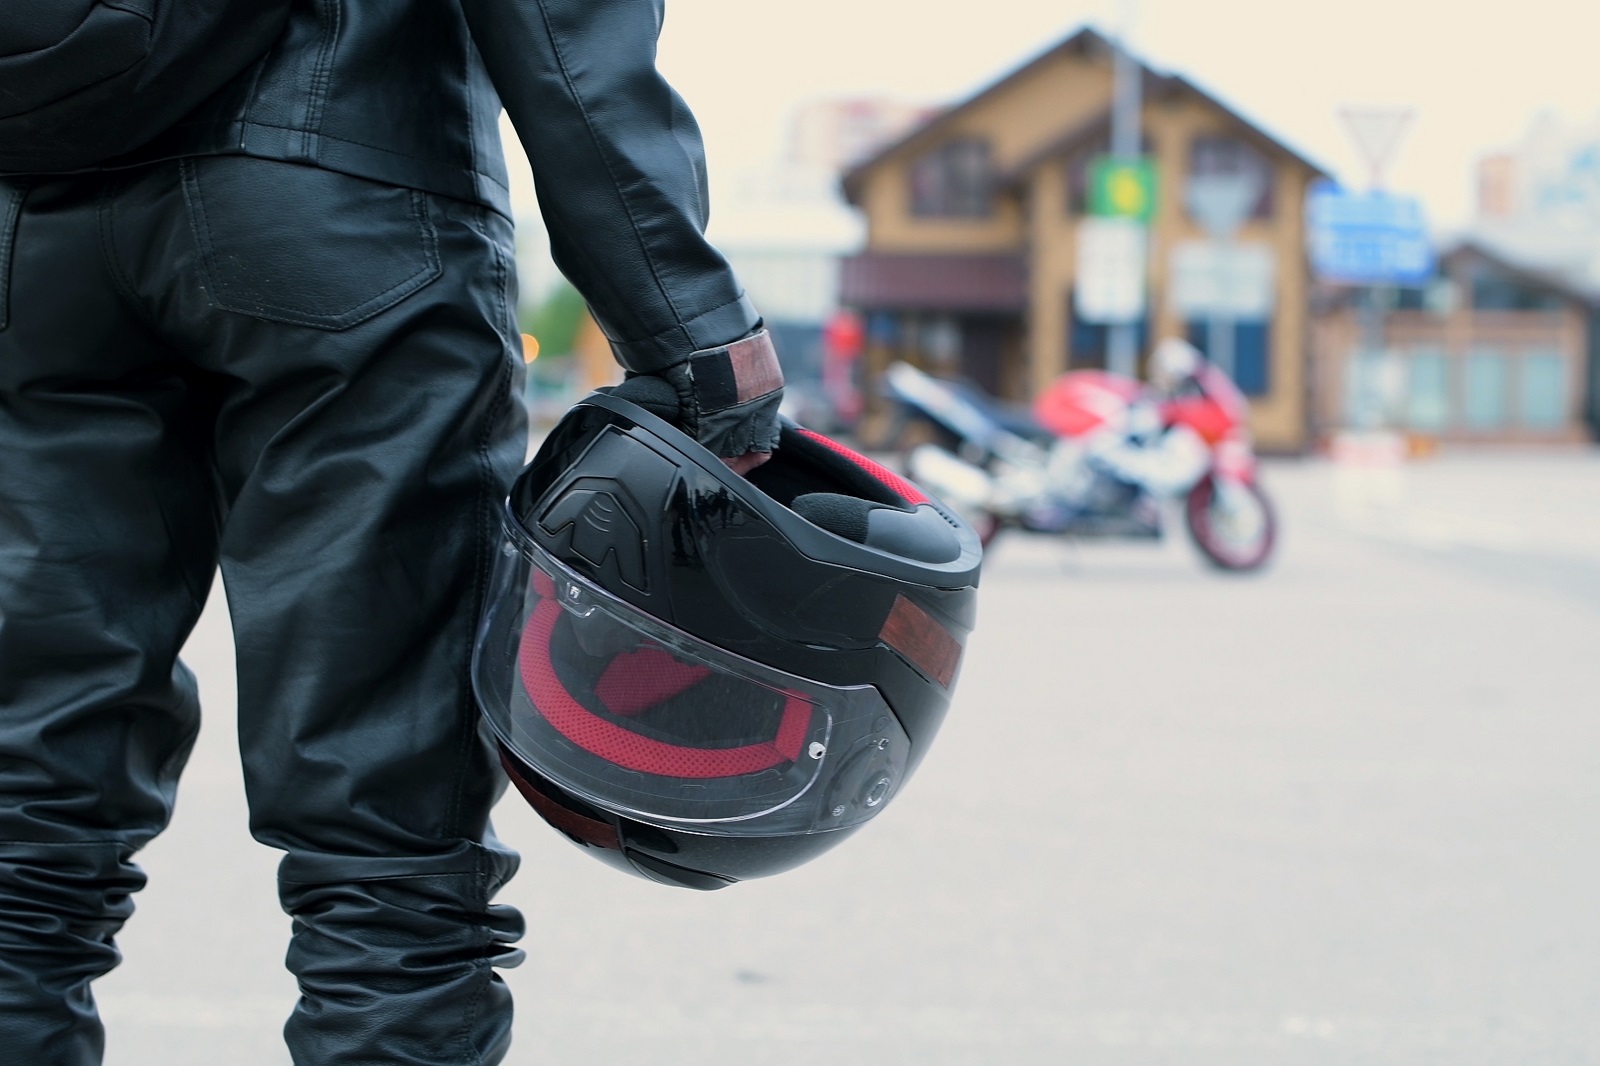 <p class="wp-caption-text">Image Credit: Shutterstock / Slava Dumchev</p>  <p><span>Motorcycle pants protect your legs from road rash and debris. Choose pants with built-in armor for the knees and hips, and ensure they are made from durable materials like leather or reinforced textile.</span></p>